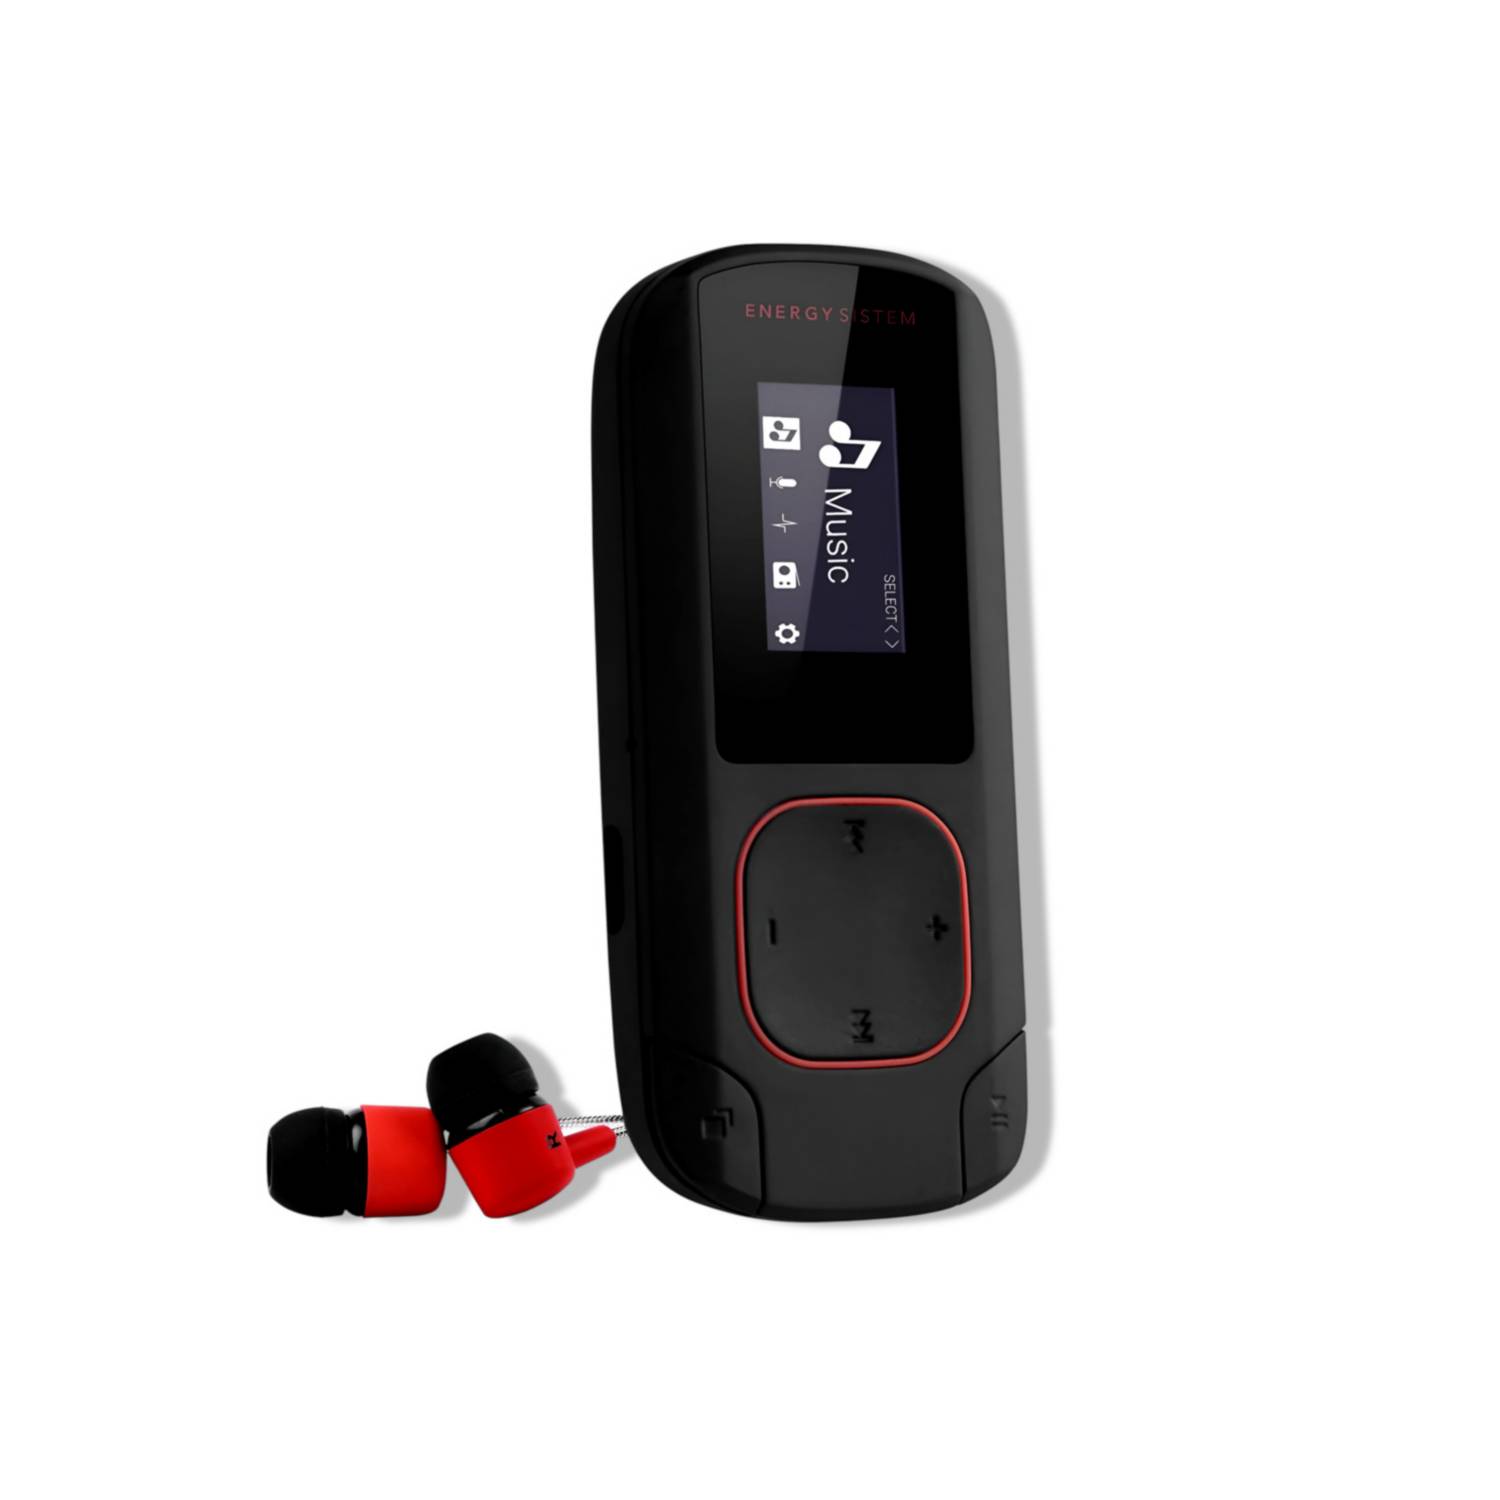 Reproductor Mp3 Bluetooth